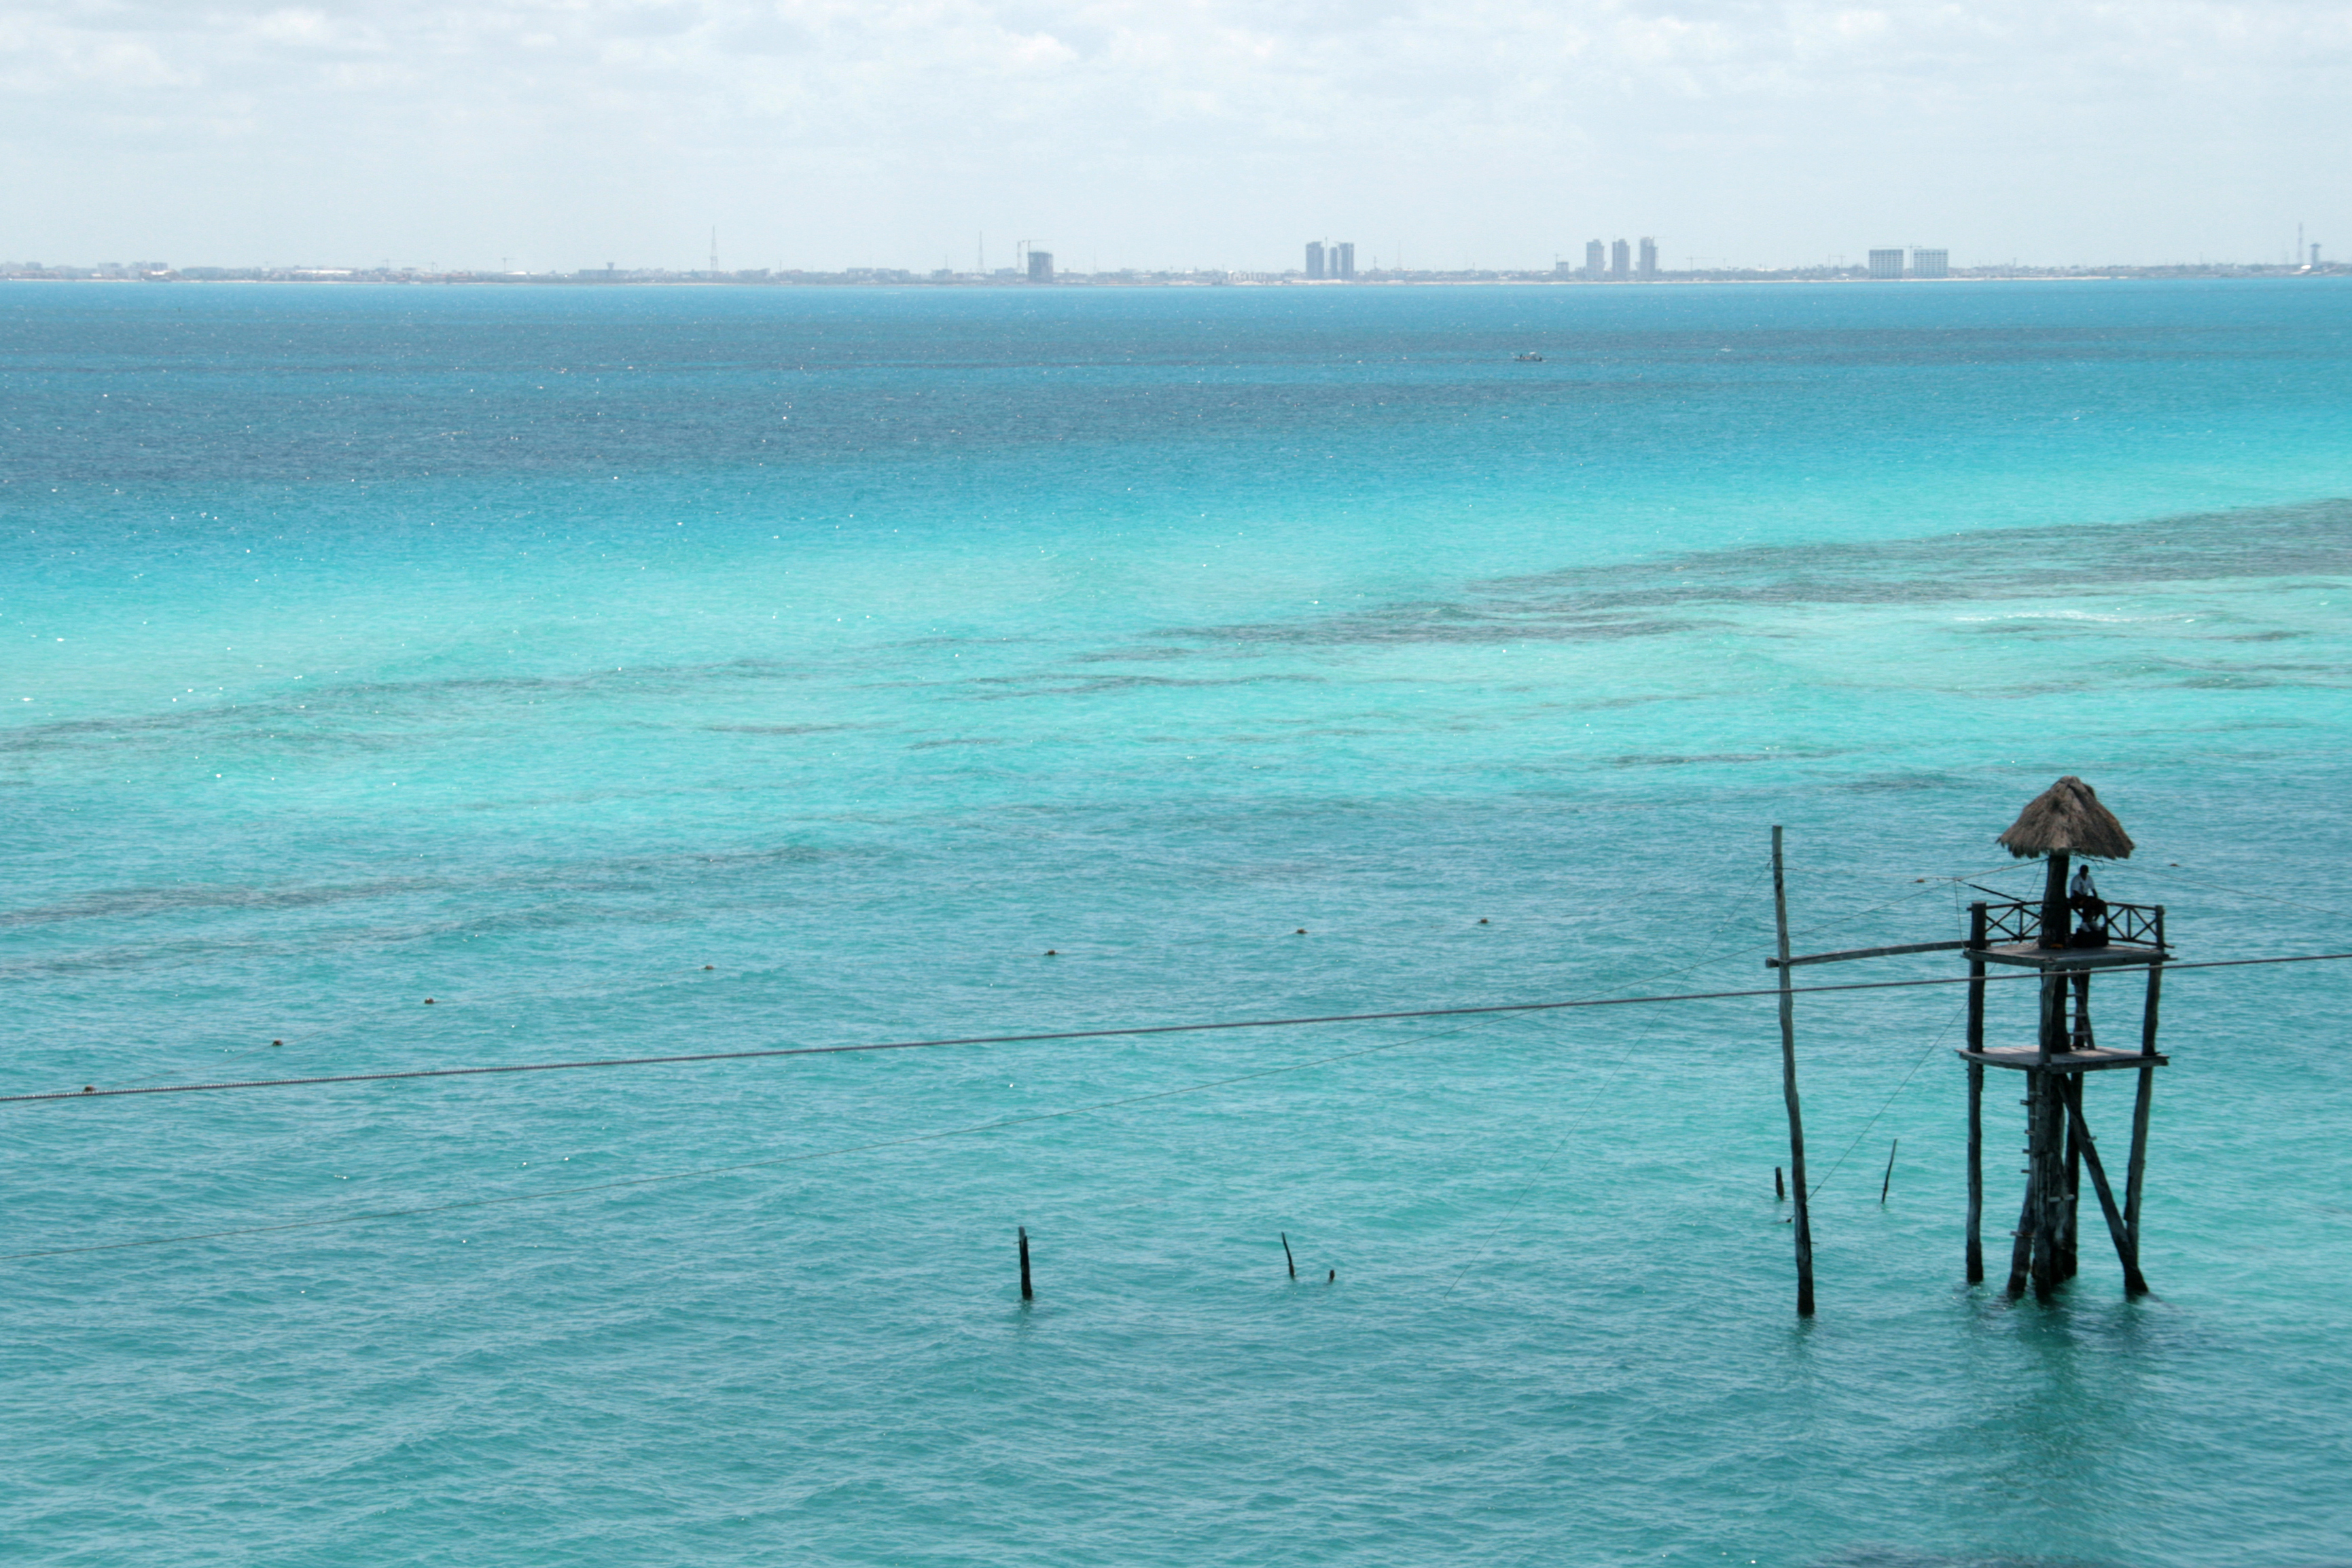 From Isla Mujeres island Cancun is seen as a monstruous and artificial hotel complex.